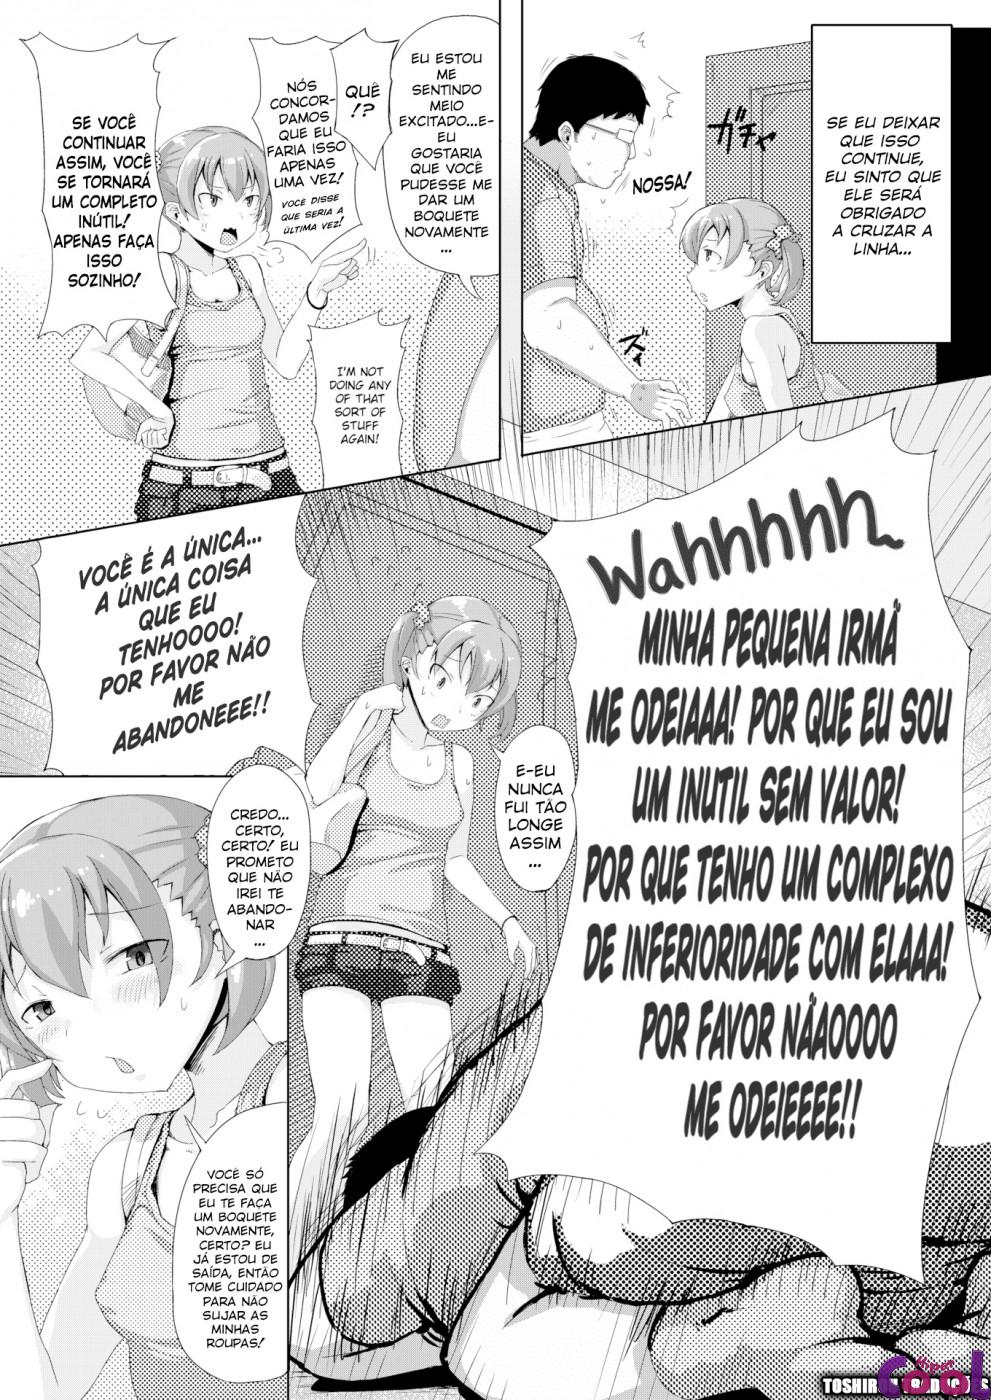 lenient-little-sister-chapter-01-page-4.jpg